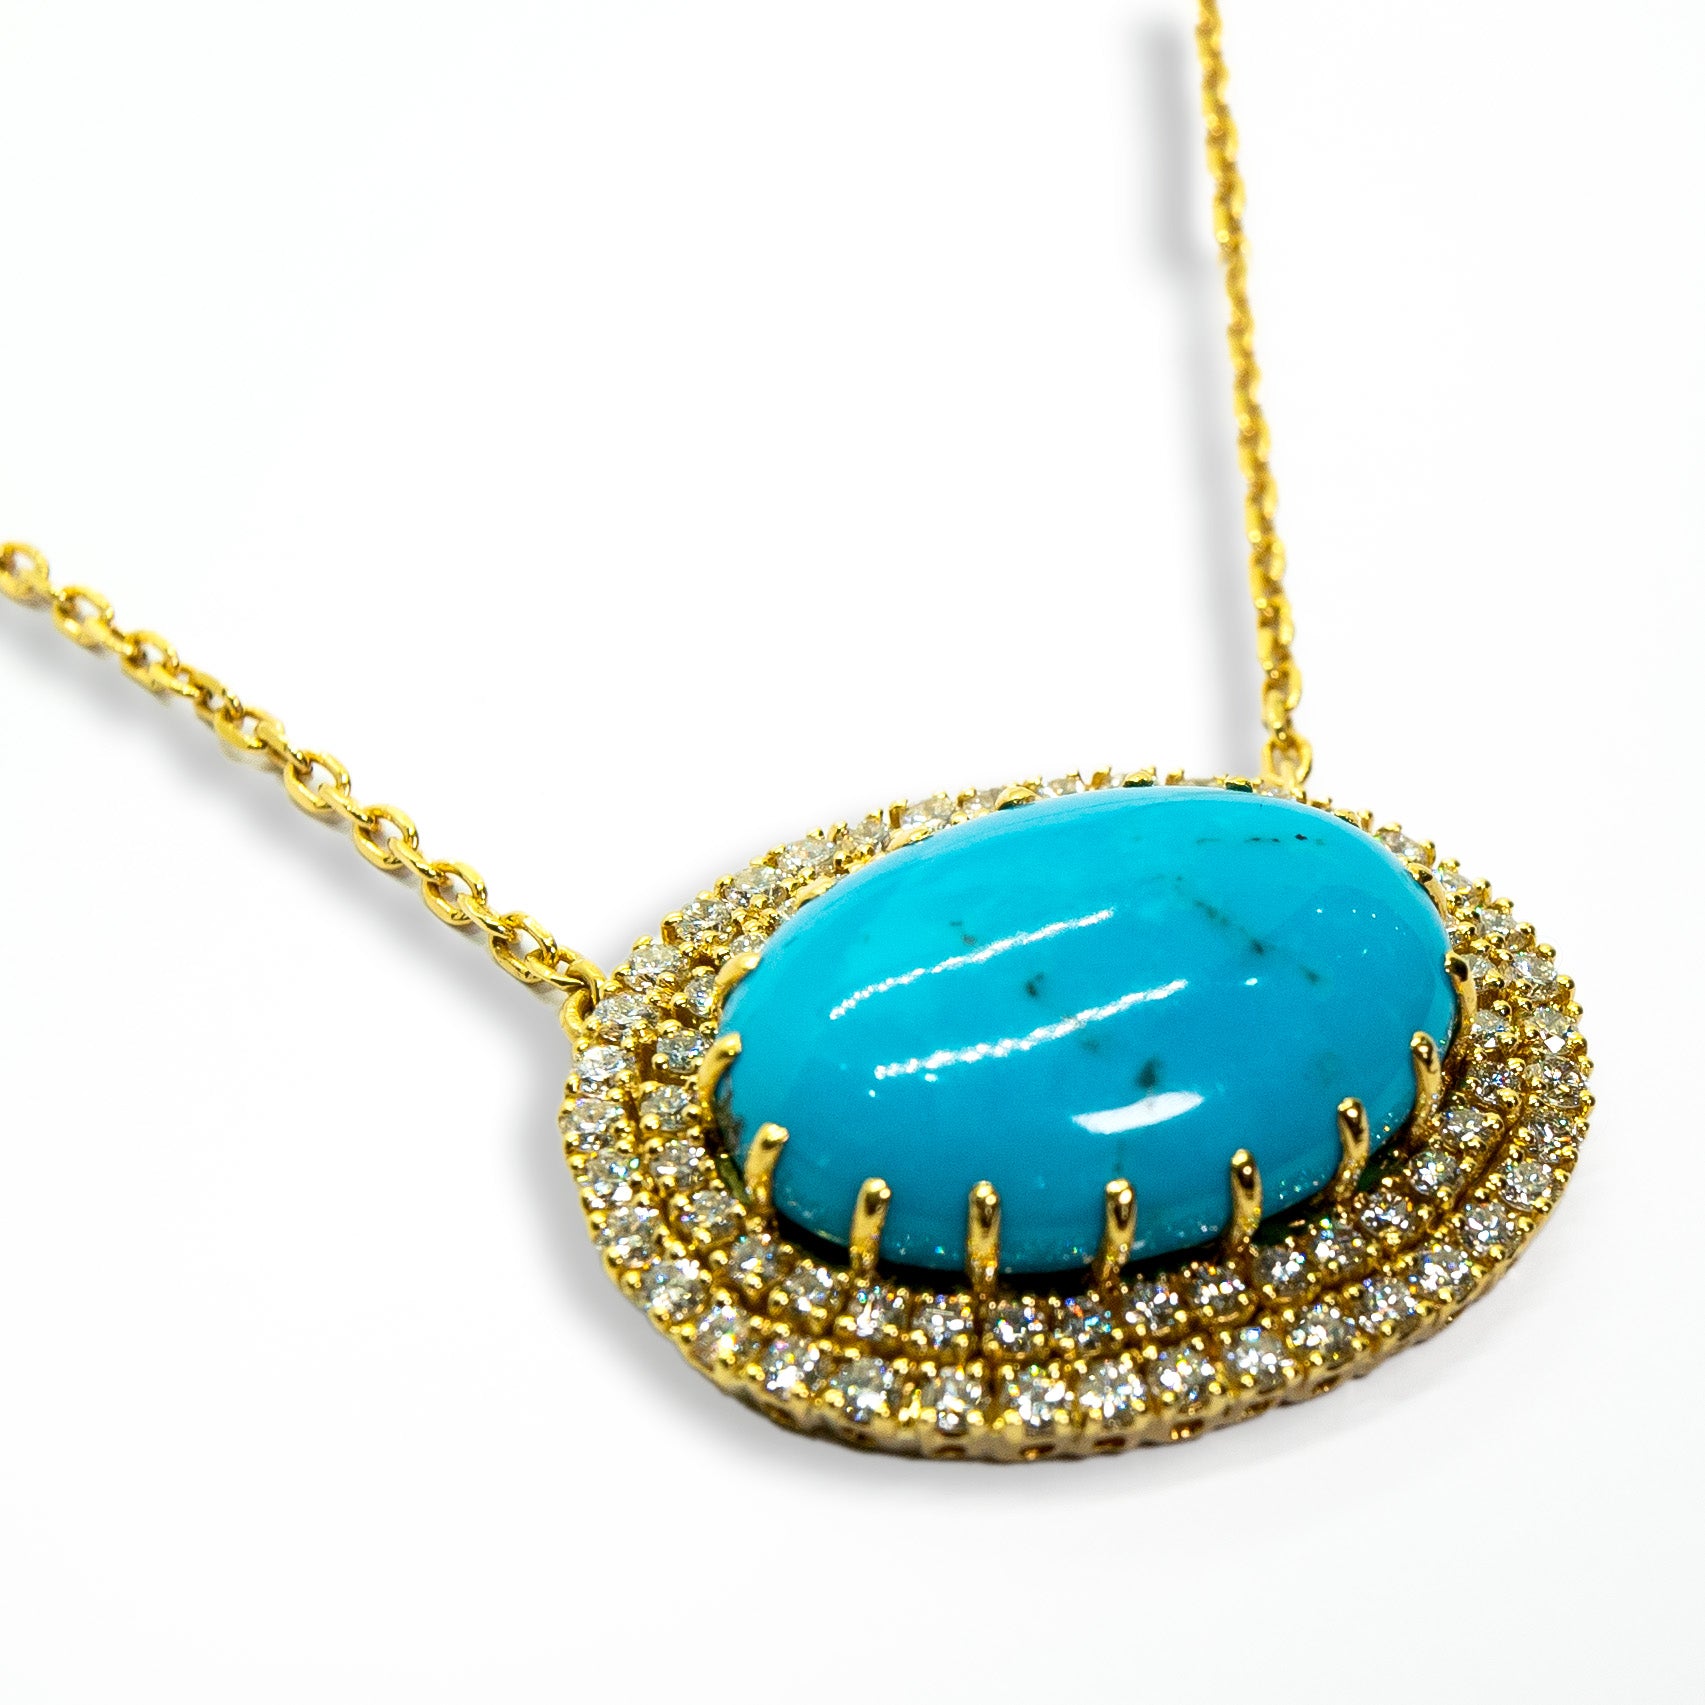 Silver Multi Stone and Turquoise Necklace - Gemstones from Ray & Scott  Limited UK